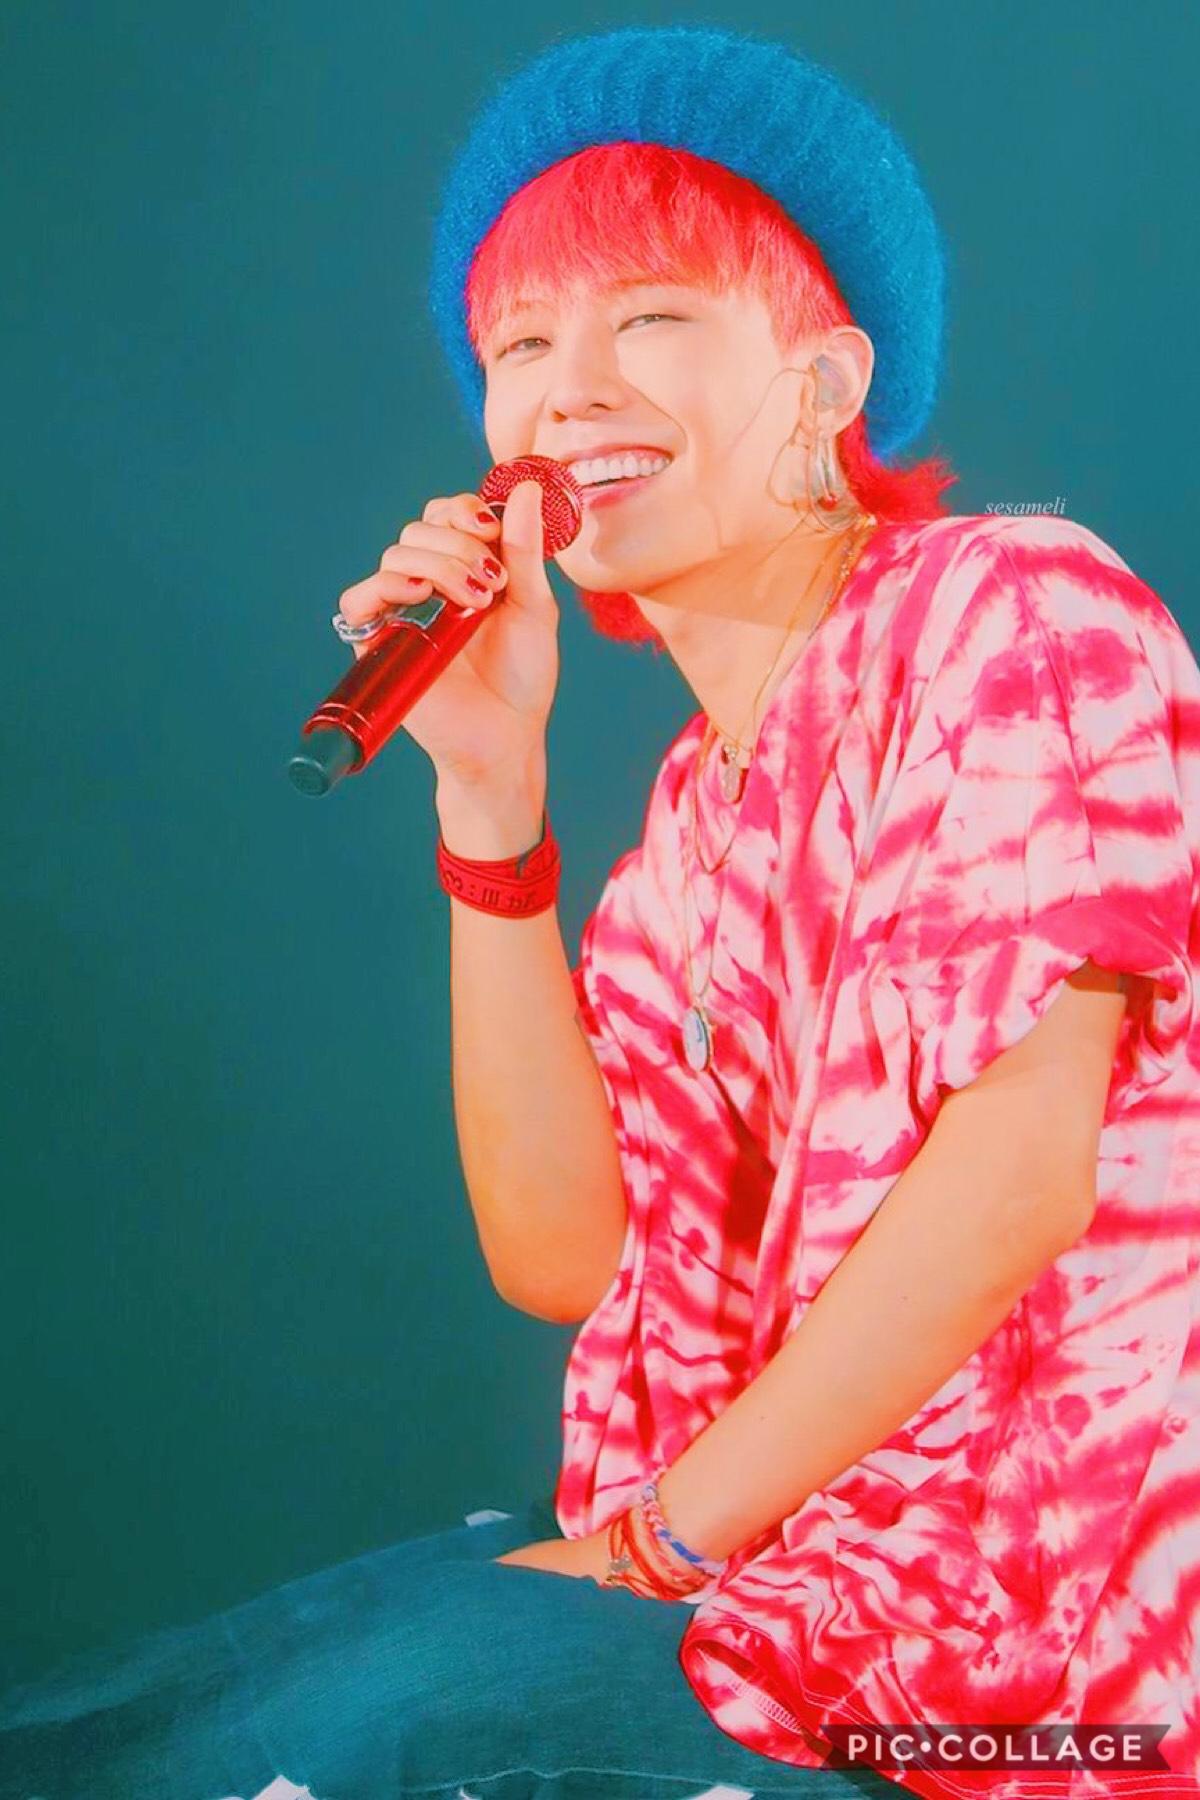 happy birthday to this beautiful & impactful man. when I was getting into kpop Big Bang called my attention & the moment I saw #GDRAGON I immediately fell for him. He is such a softie but a powerful performer. I love you Jiyongie ❤️❤️❤️
#HappyKWONJIYONGDa